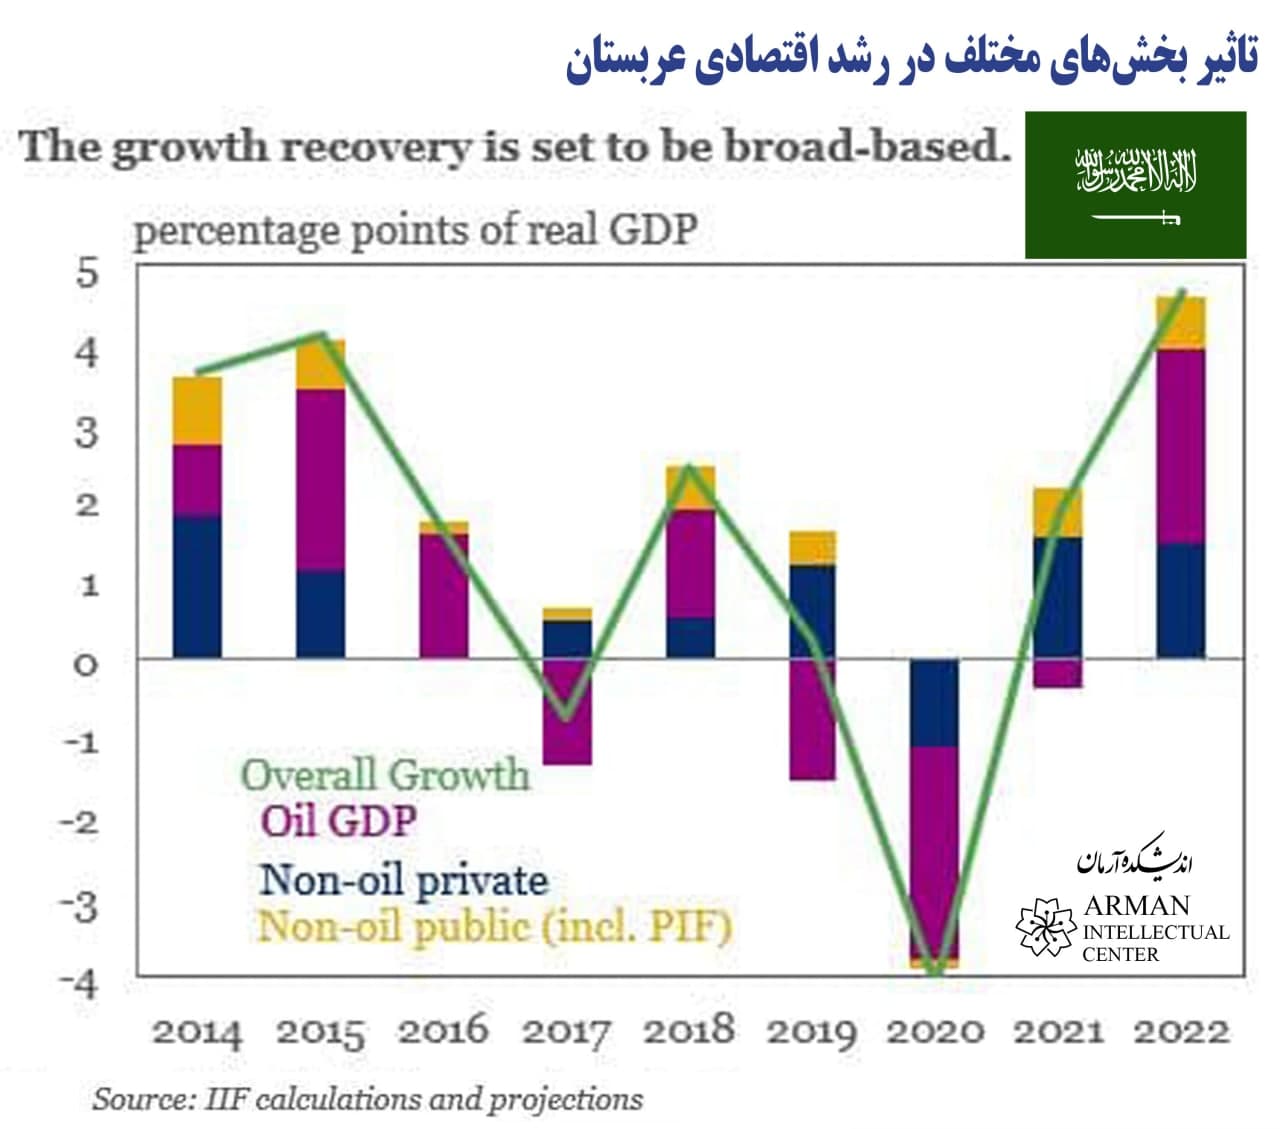 Saudi Oil Growth Recovery is set to be broad base , percentage points of real GDP